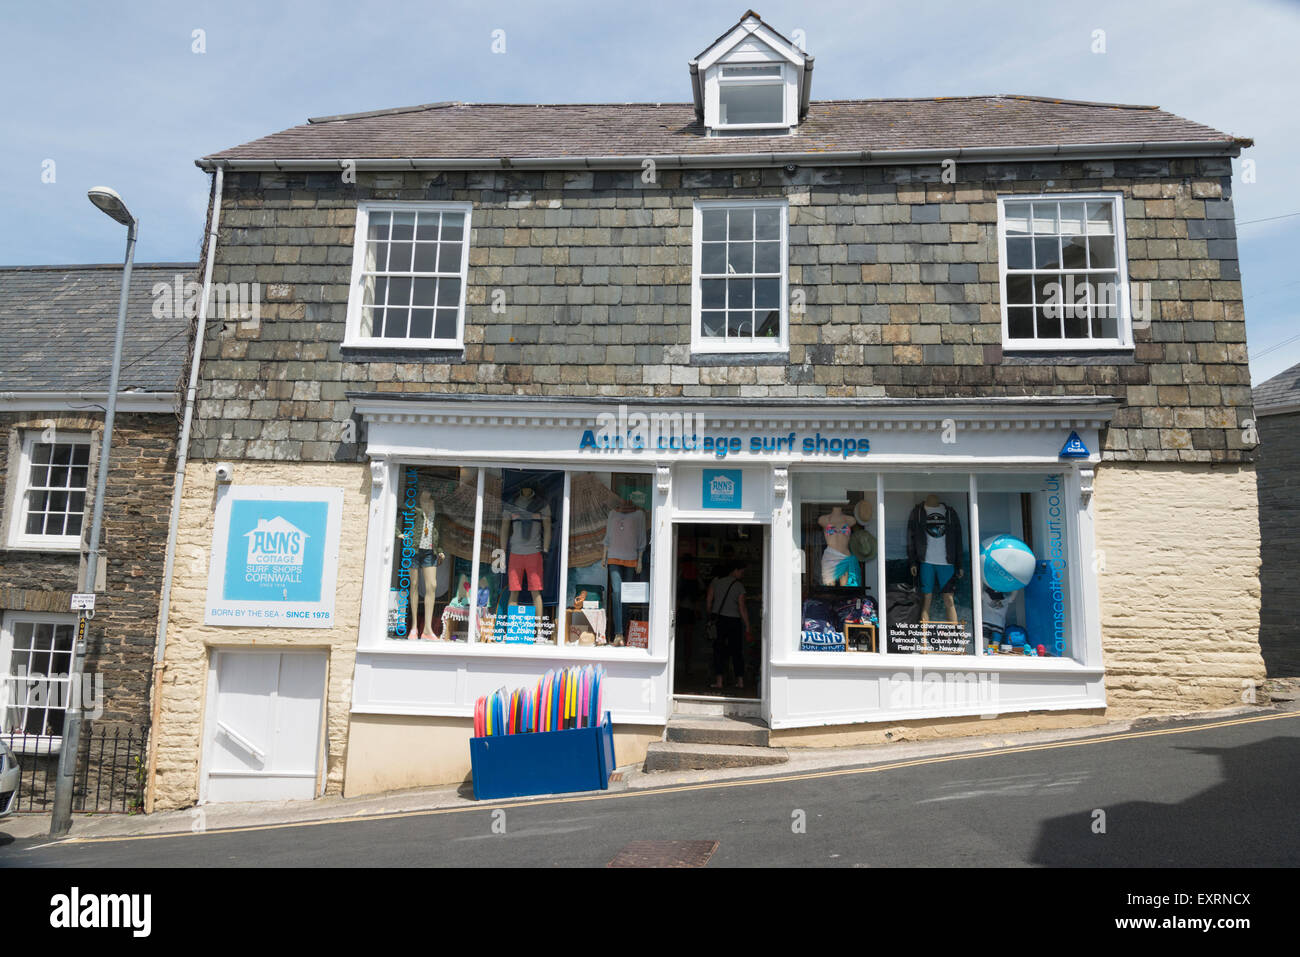 Ann S Cottage Surf Shop In Padstow Cornwall Uk Stock Photo